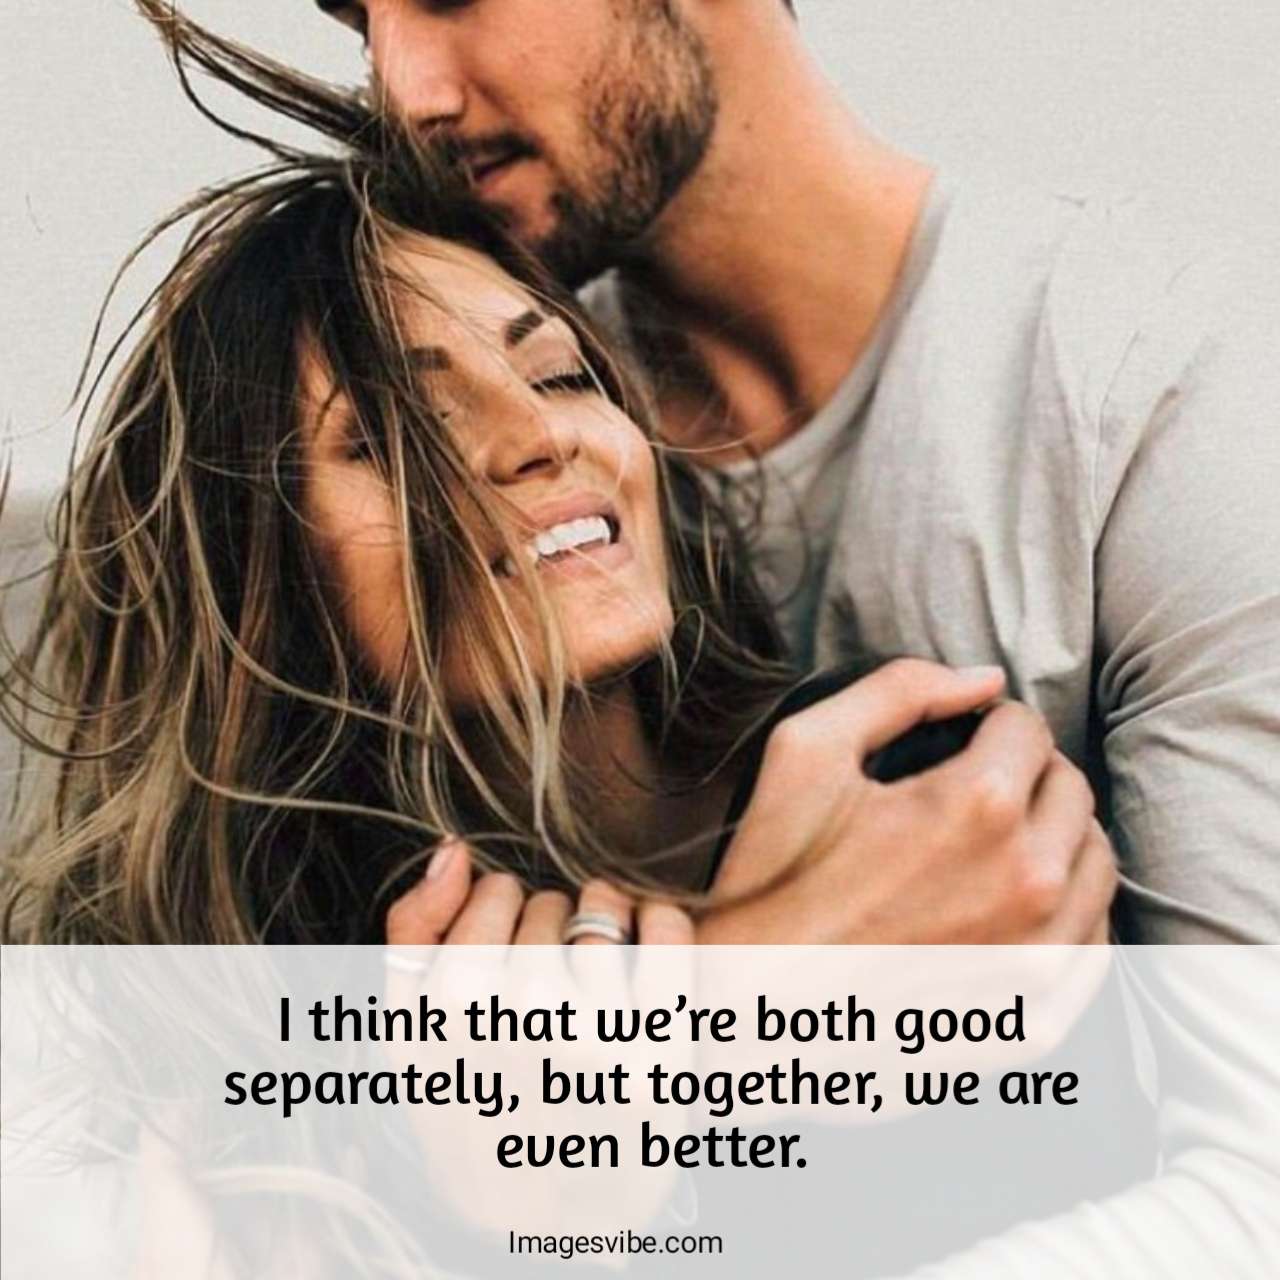 Couple Images With Quotes29 